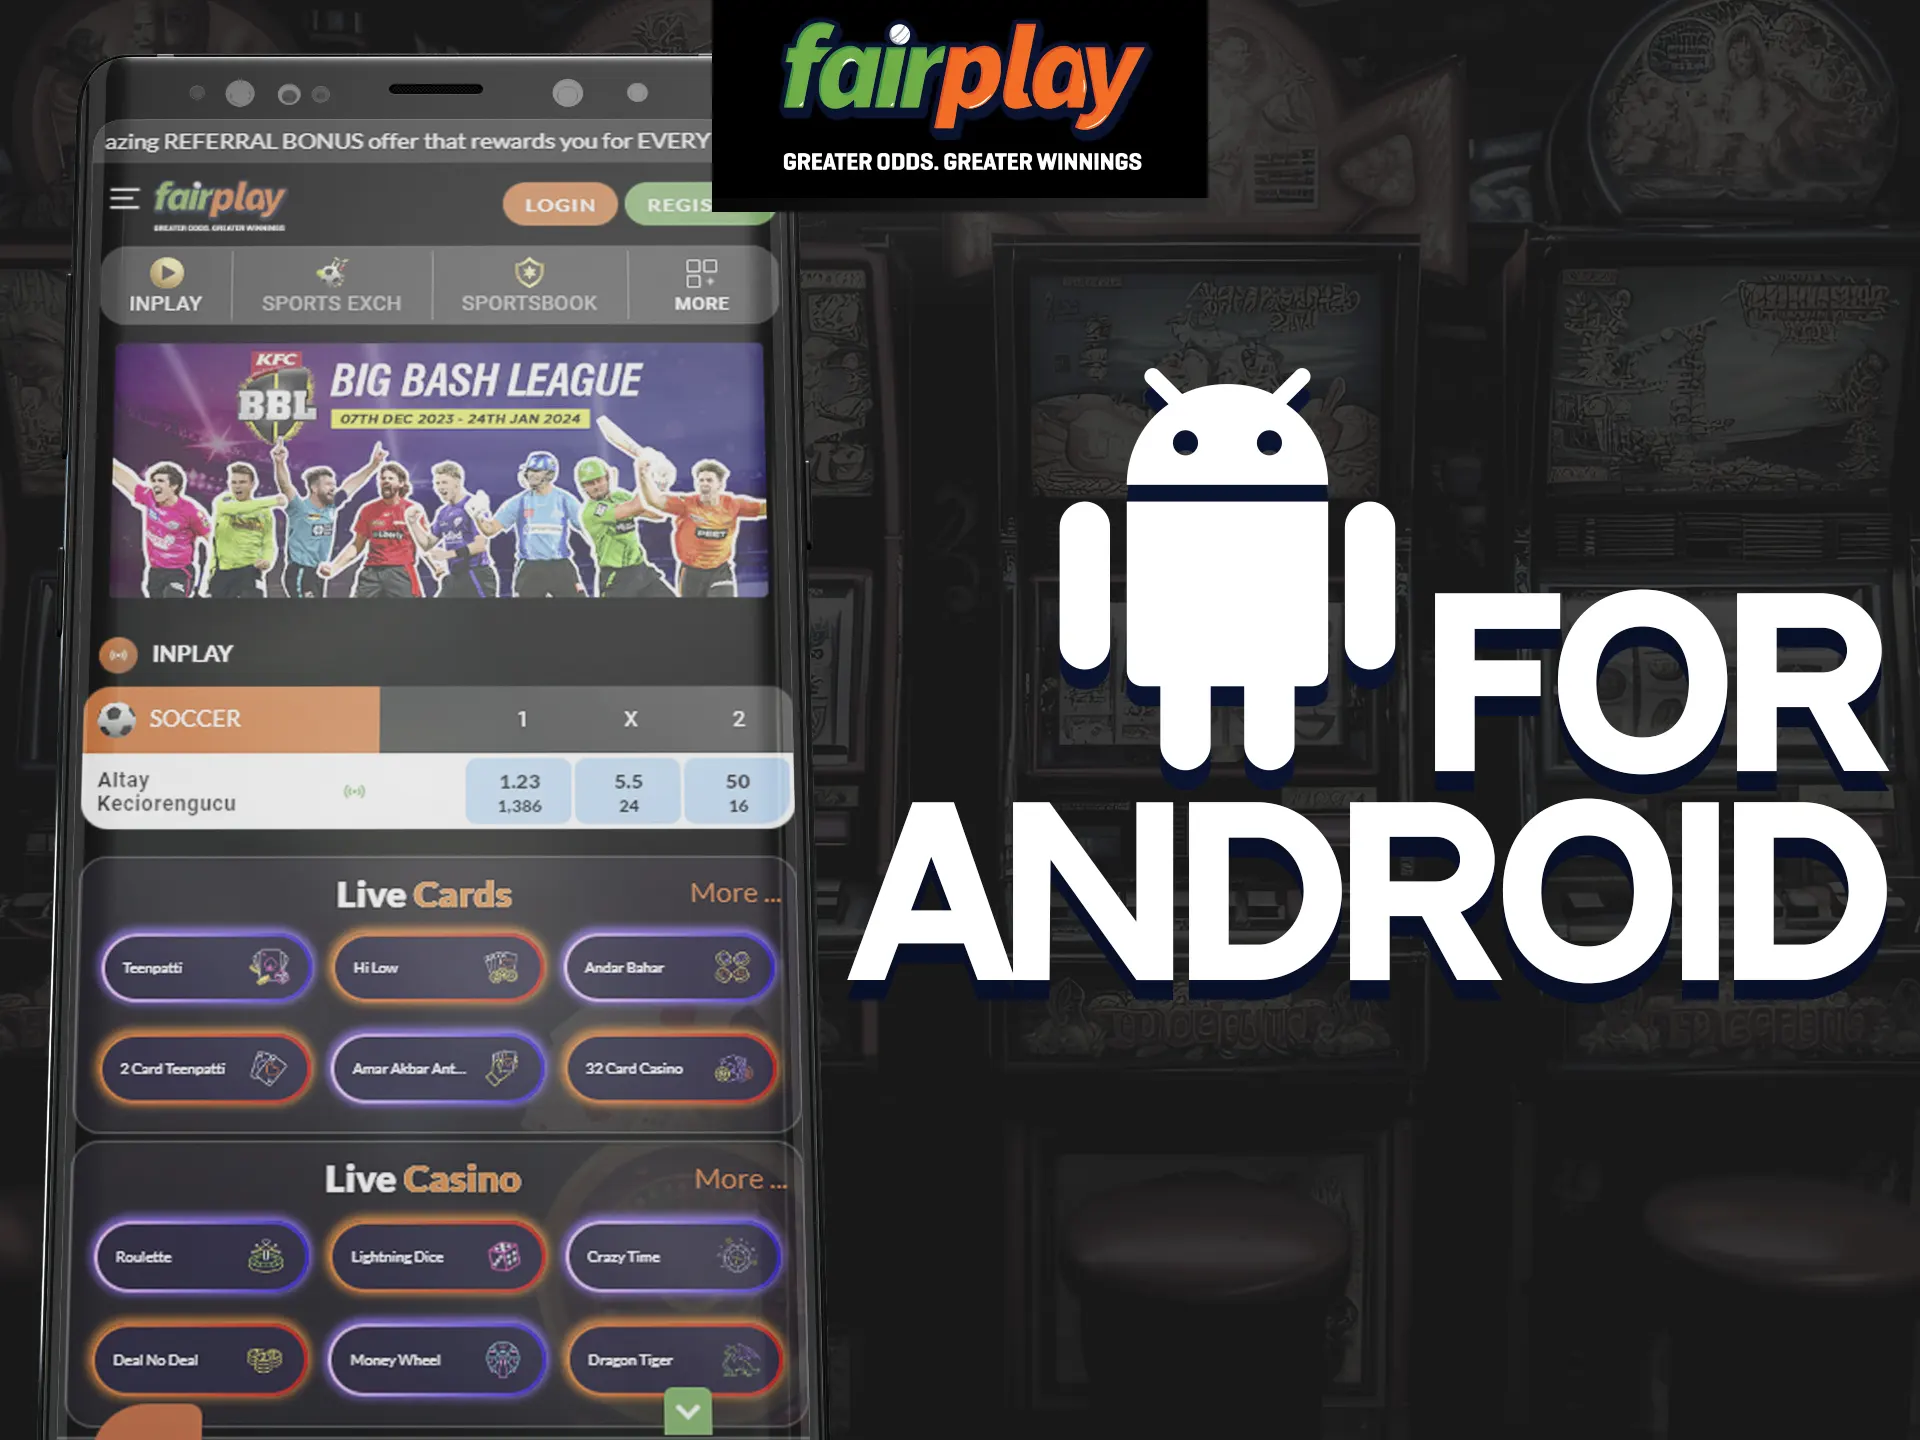 Take the opportunity to use a Fairsplay`s Android app.